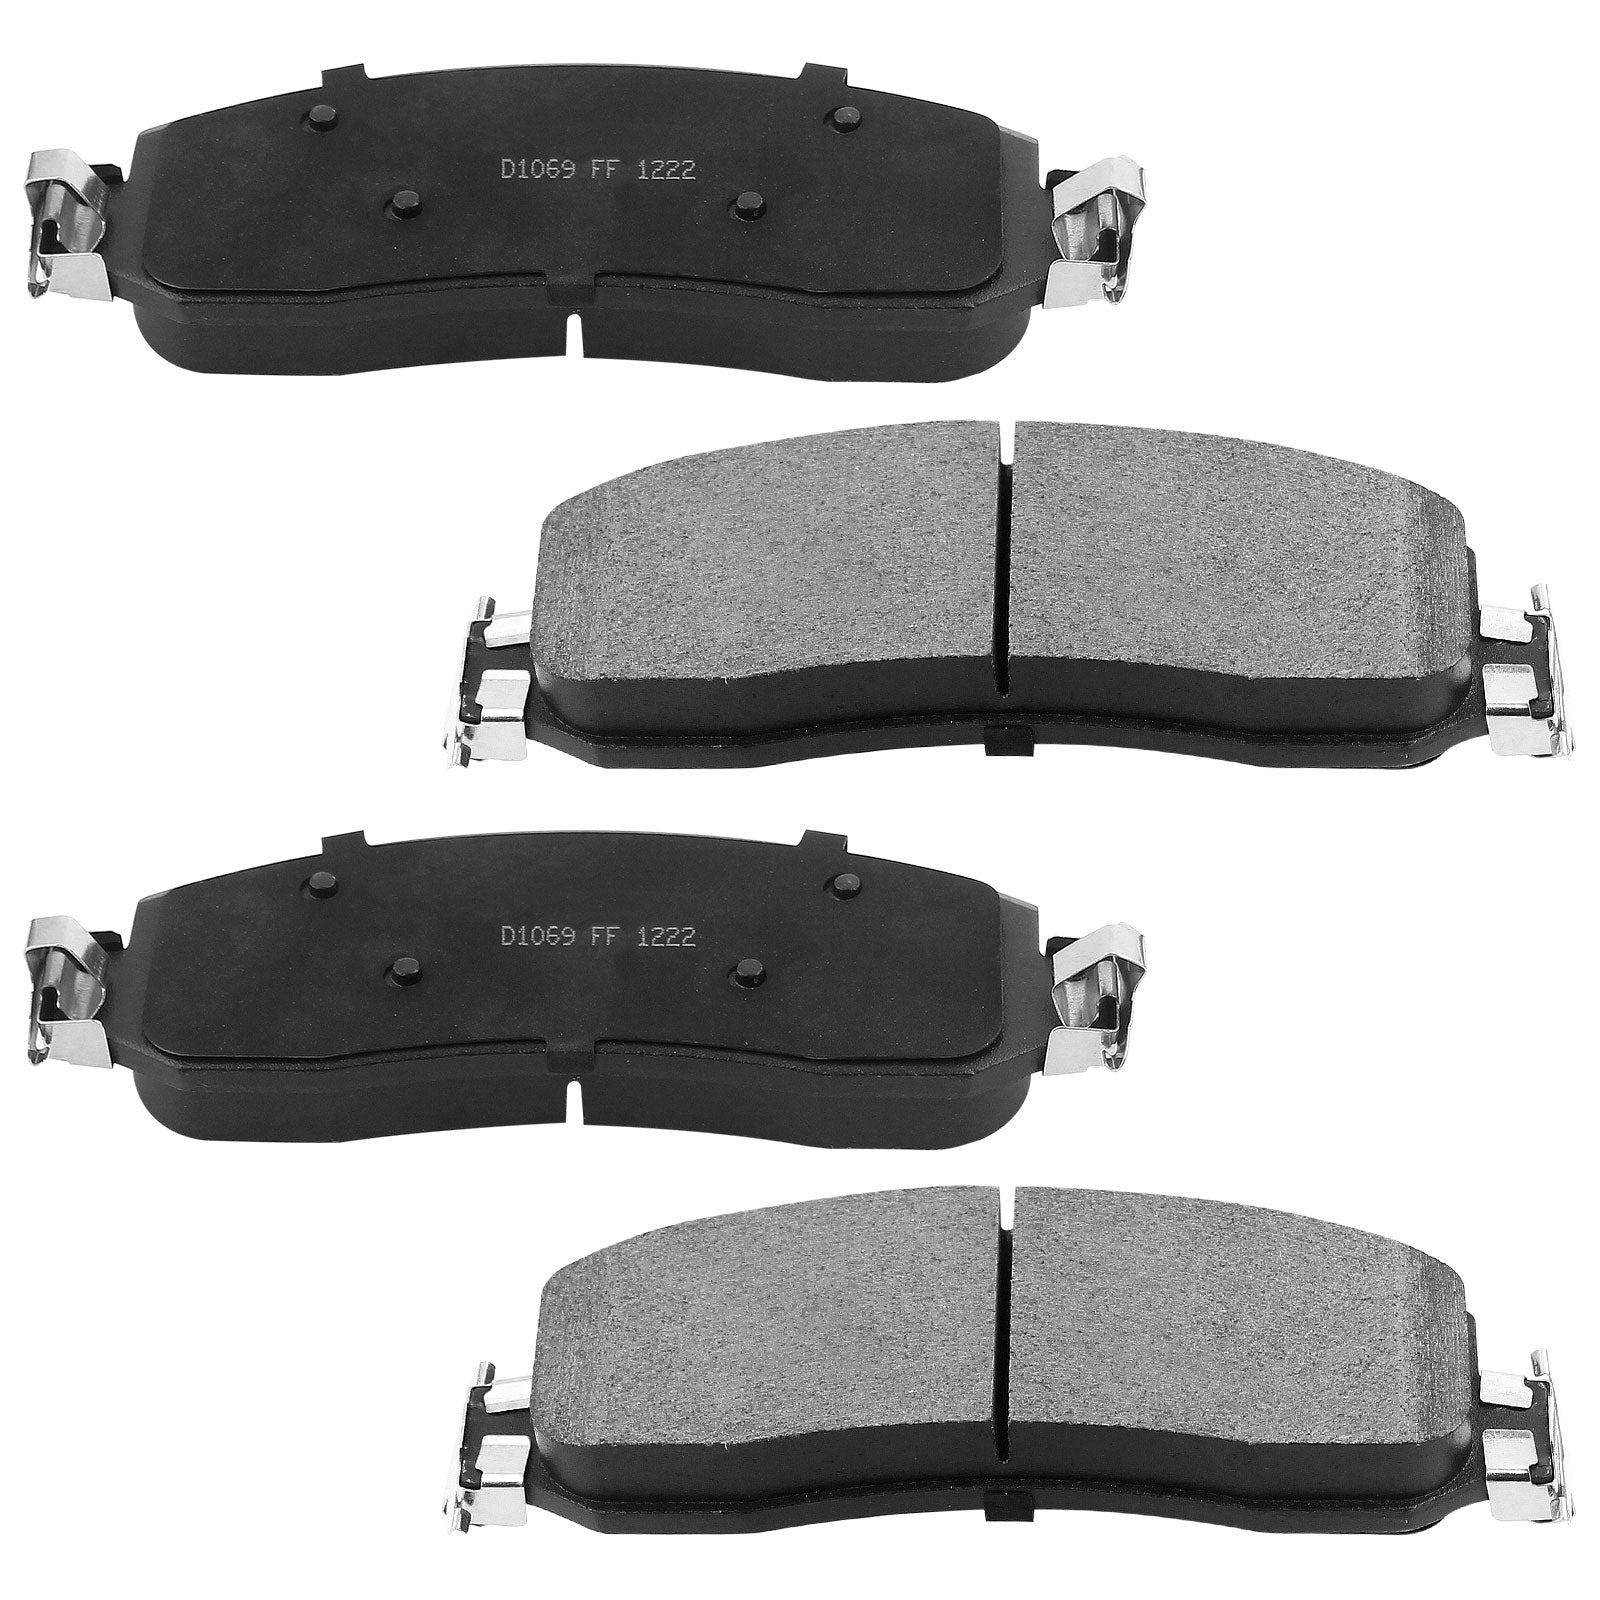 Front Ceramic Brake Pads w/Hardware Kits Fits for Ford F-250 Super Duty 2005-2011 (All Models), Ford F-350 Super Duty 2005-2012 (All Models)-Low Dust Brake Pad-4 Pack MotorbyMotor